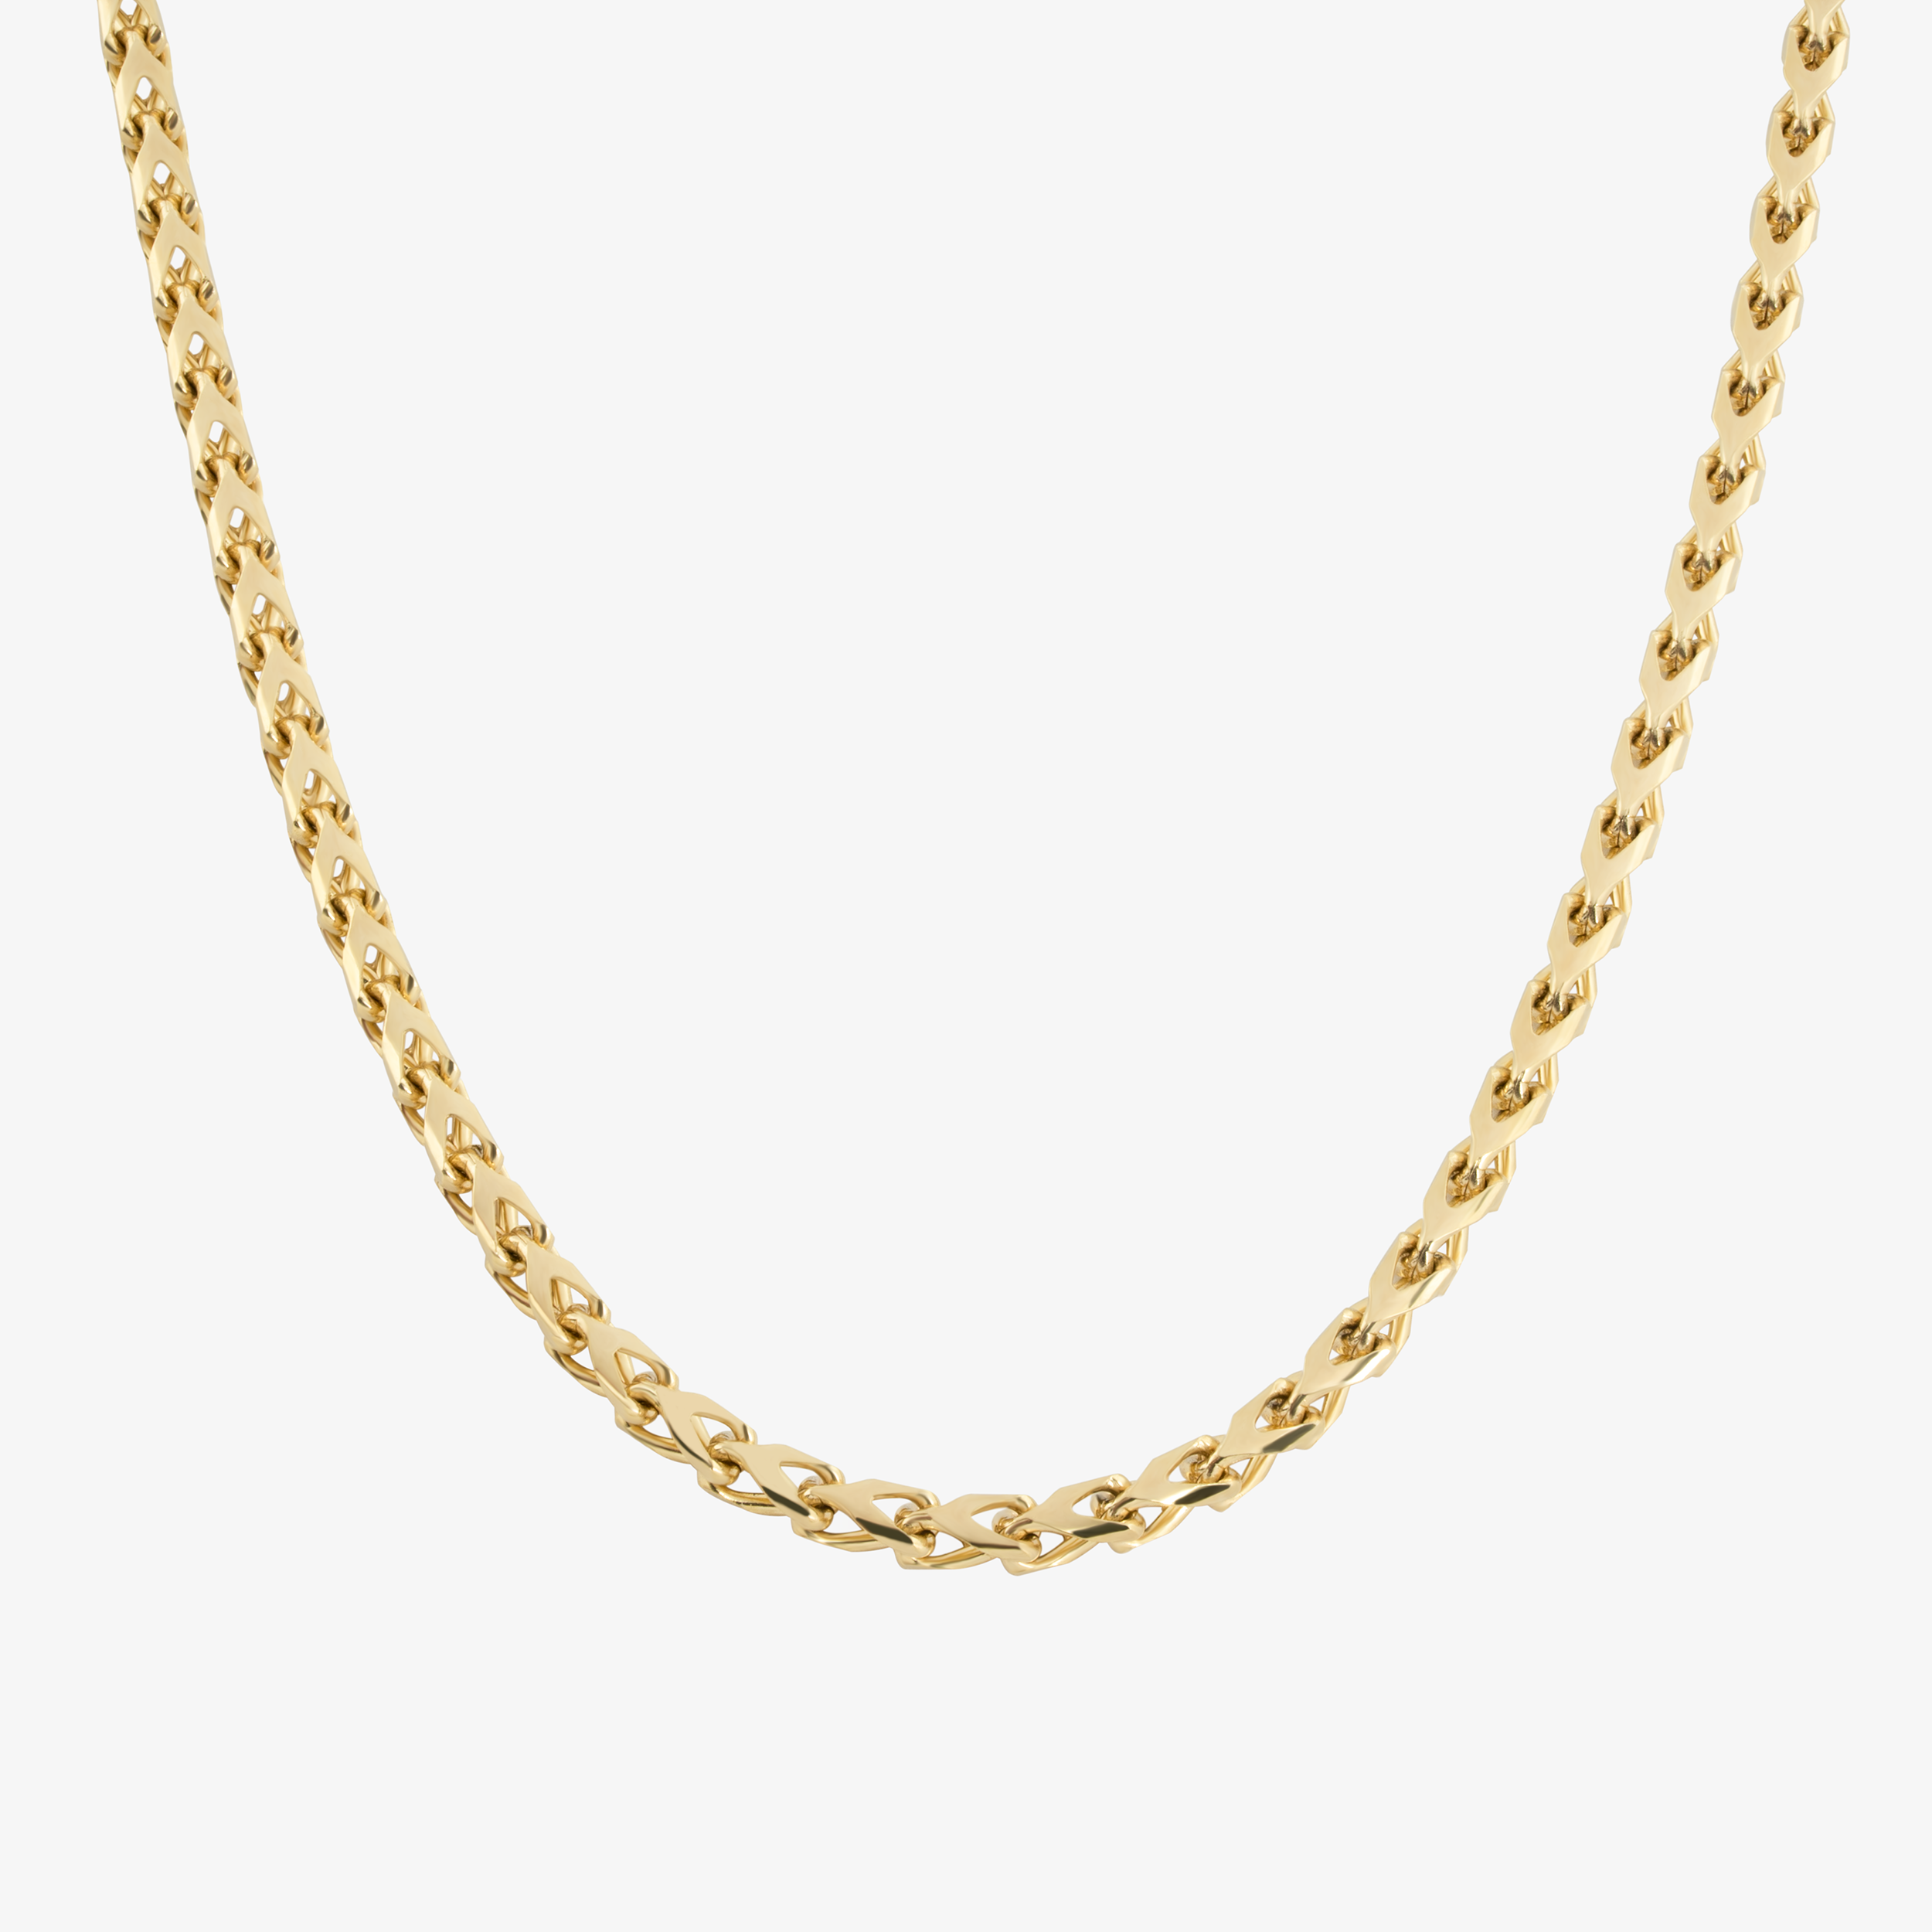 2mm Franco Chain In 14K Solid Yellow Gold